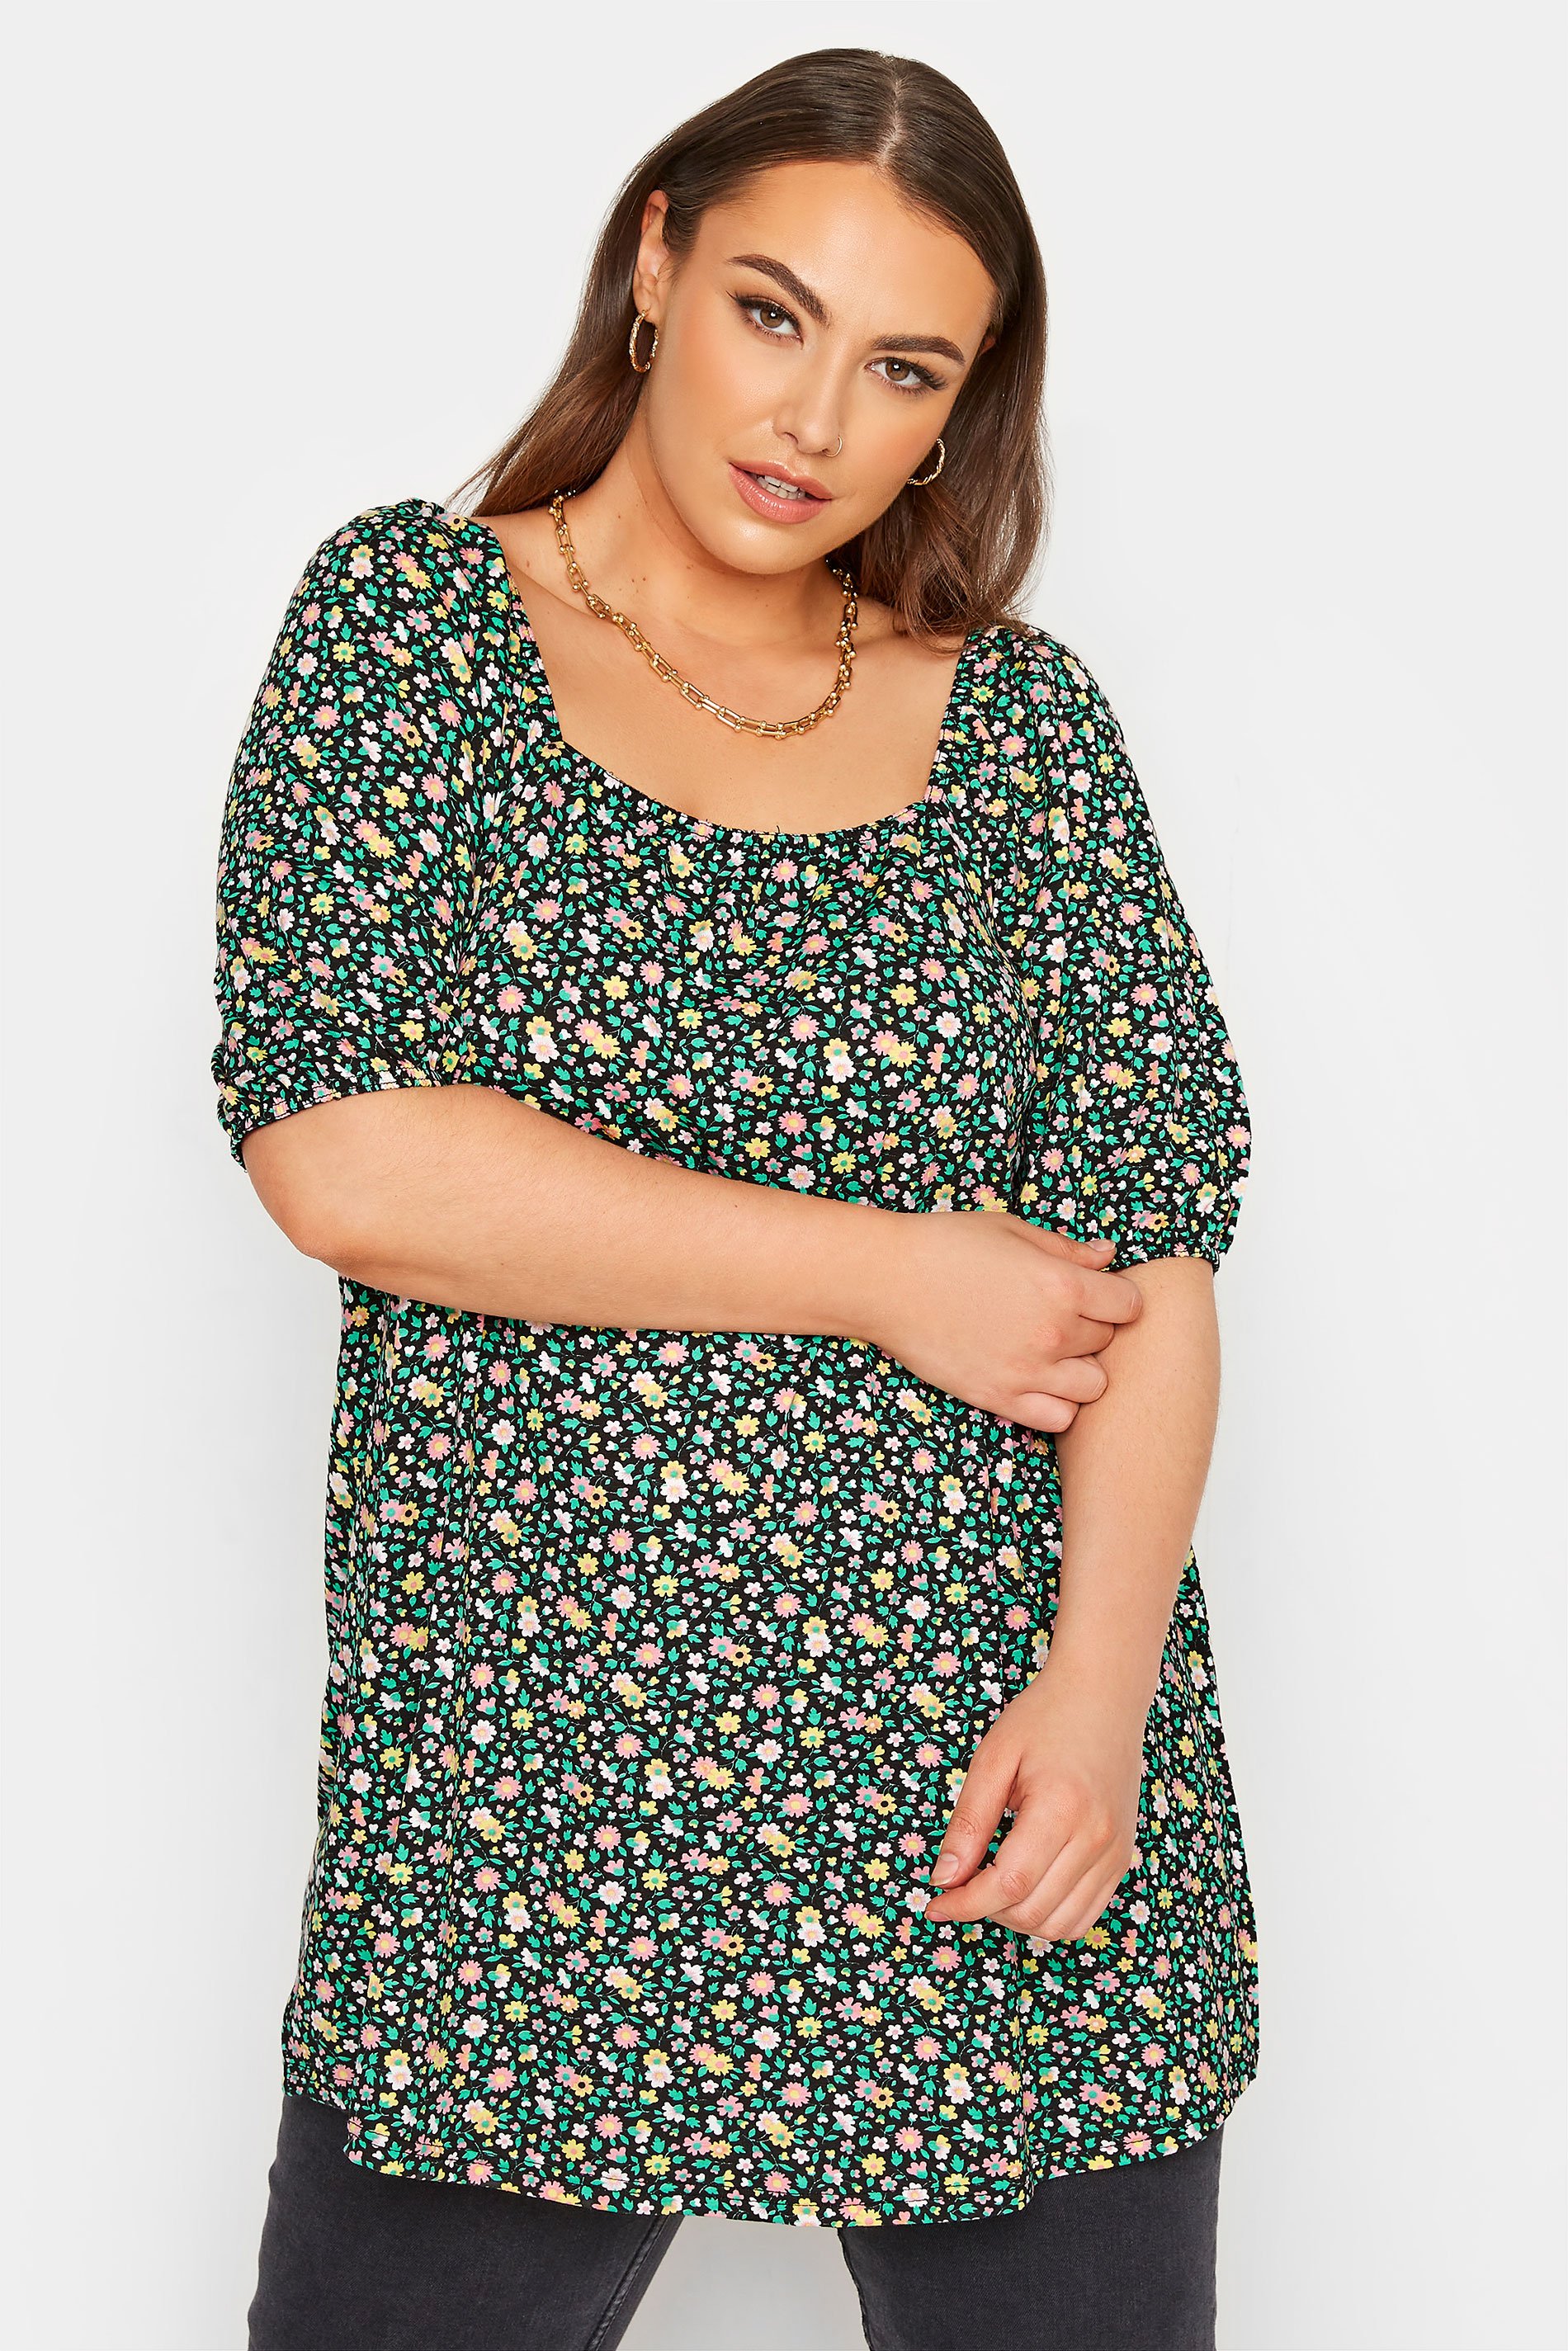 LIMITED COLLECTION Curve Green Ditsy Floral Top_A.jpg